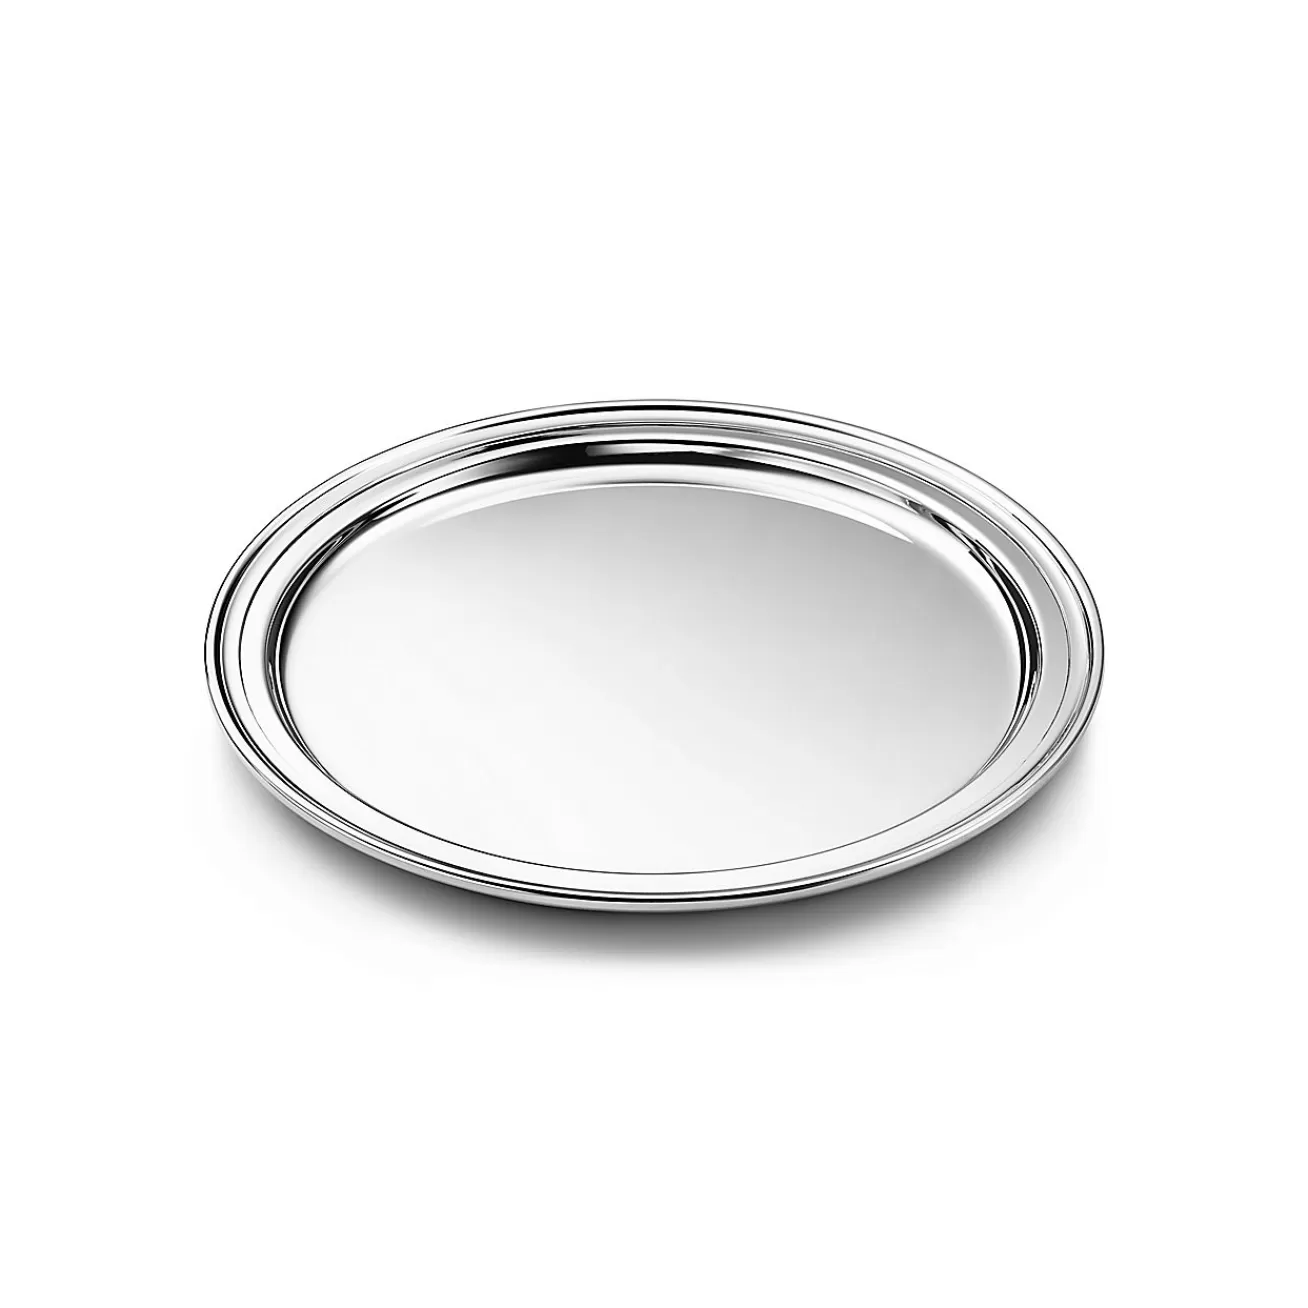 Tiffany & Co. Regency round tray in sterling silver. | ^ The Home | Housewarming Gifts